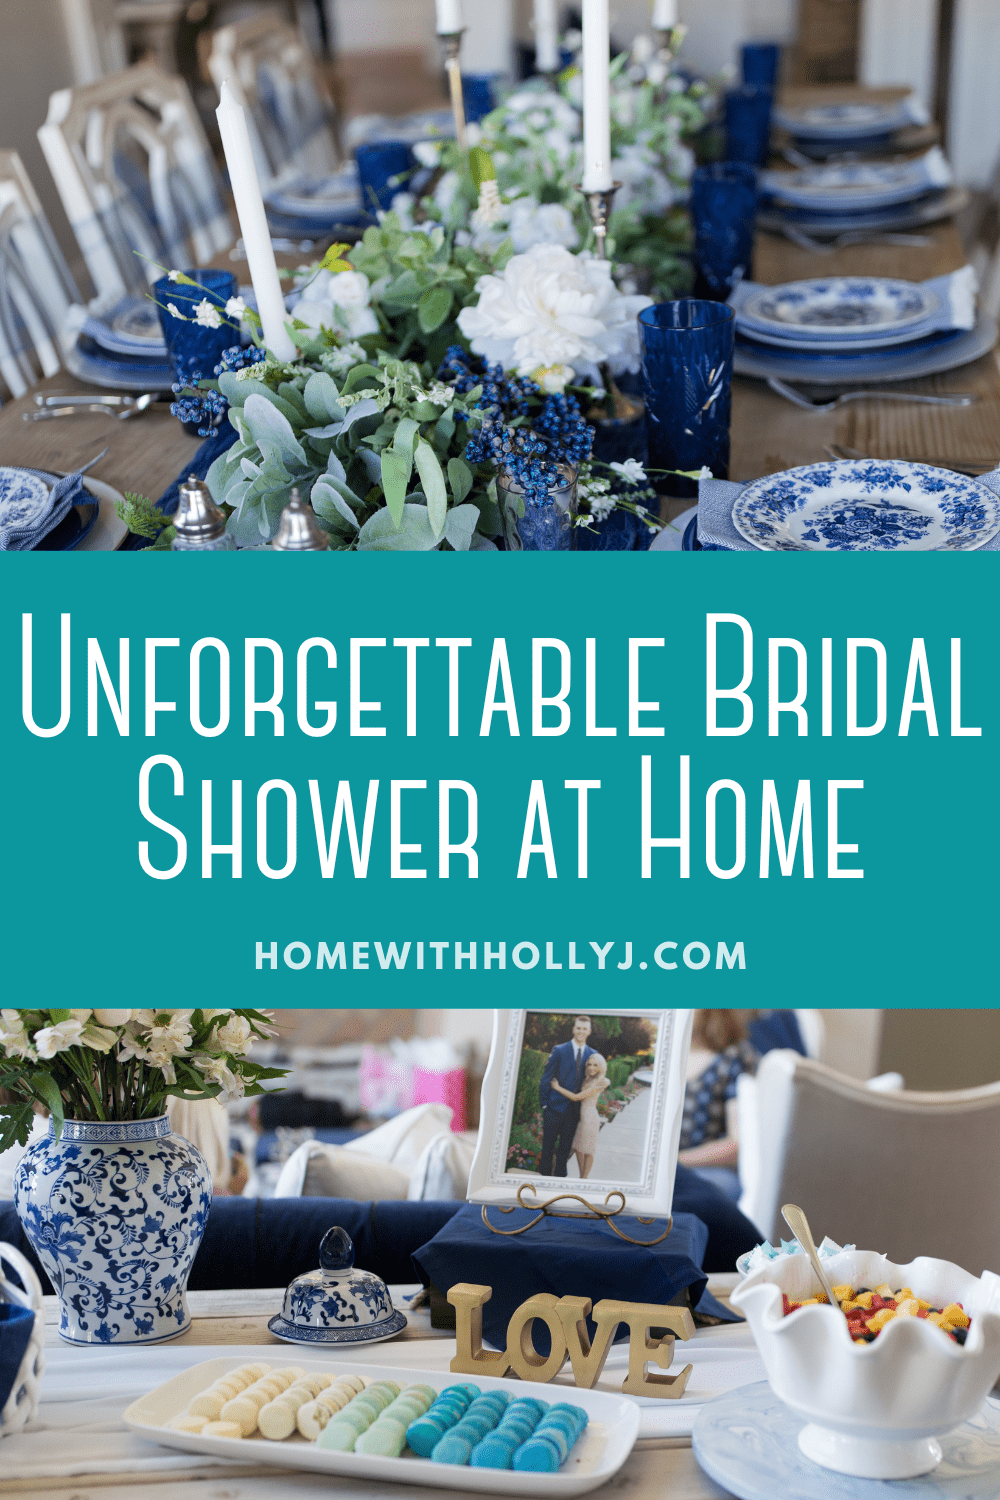 Discover creative and unforgettable bridal shower ideas at home to plan the perfect celebration for the bride-to-be. Read more here.